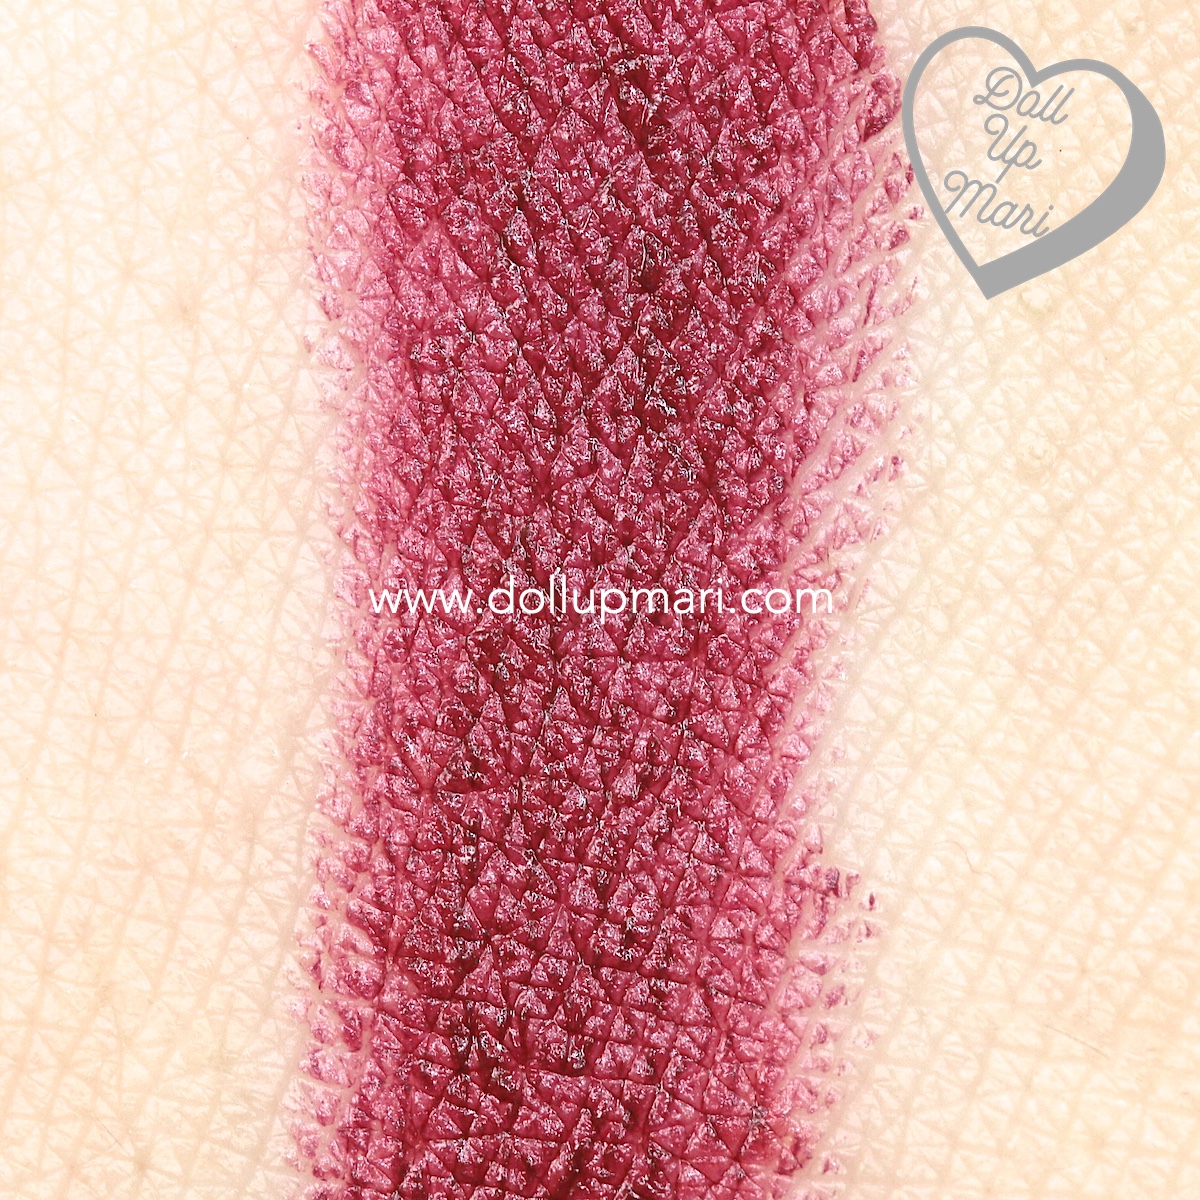 swatch of Superb Wine shade of AVON Perfectly Matte Lipstick 